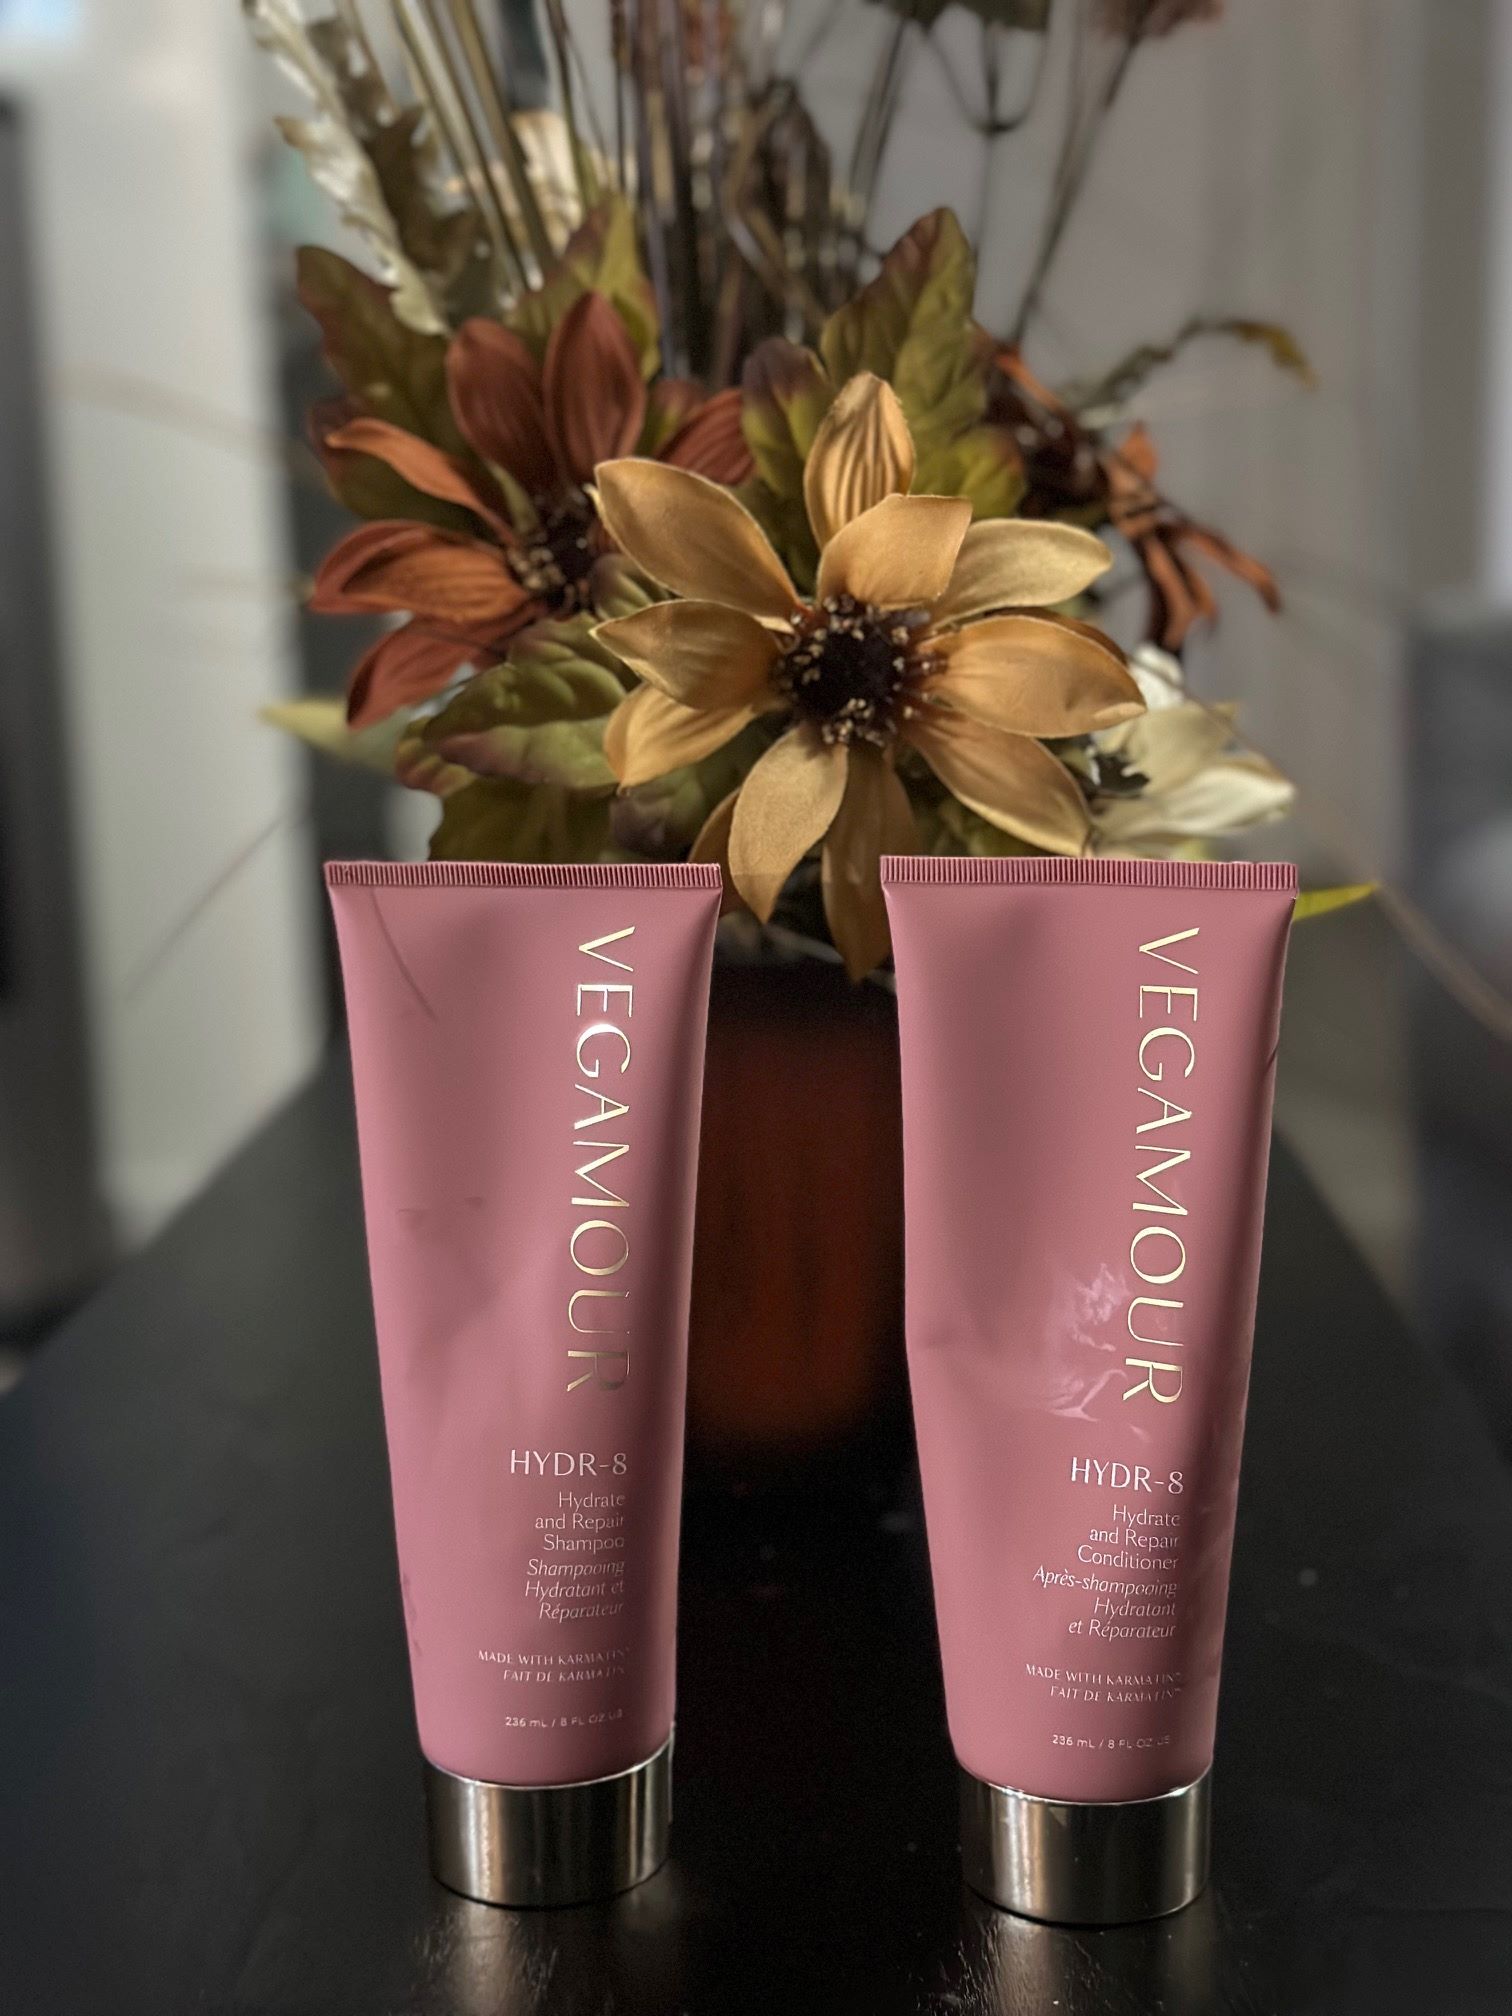 An image of the Vegamour Hydr8 shampoo and conditioner.